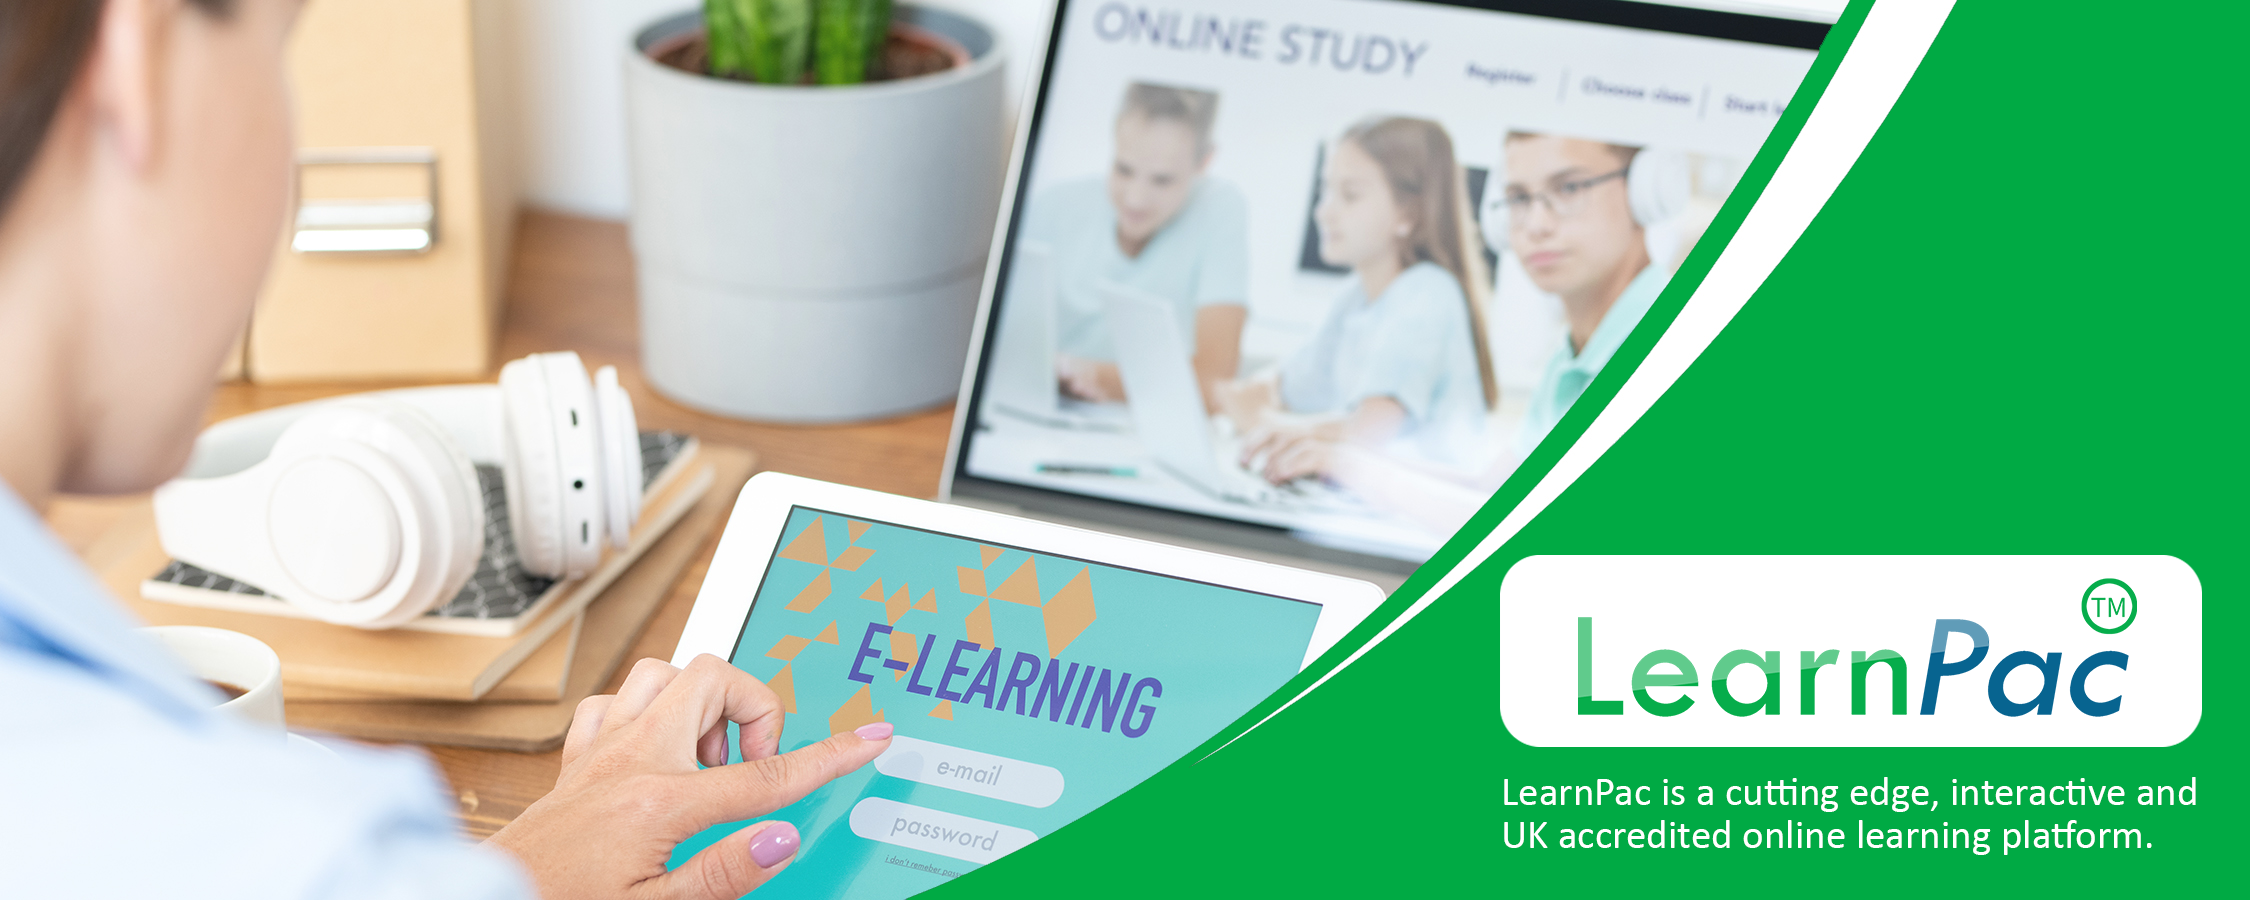 Complaints Handling in Health and Care - Online Learning Courses - E-Learning Courses - LearnPac Systems UK -